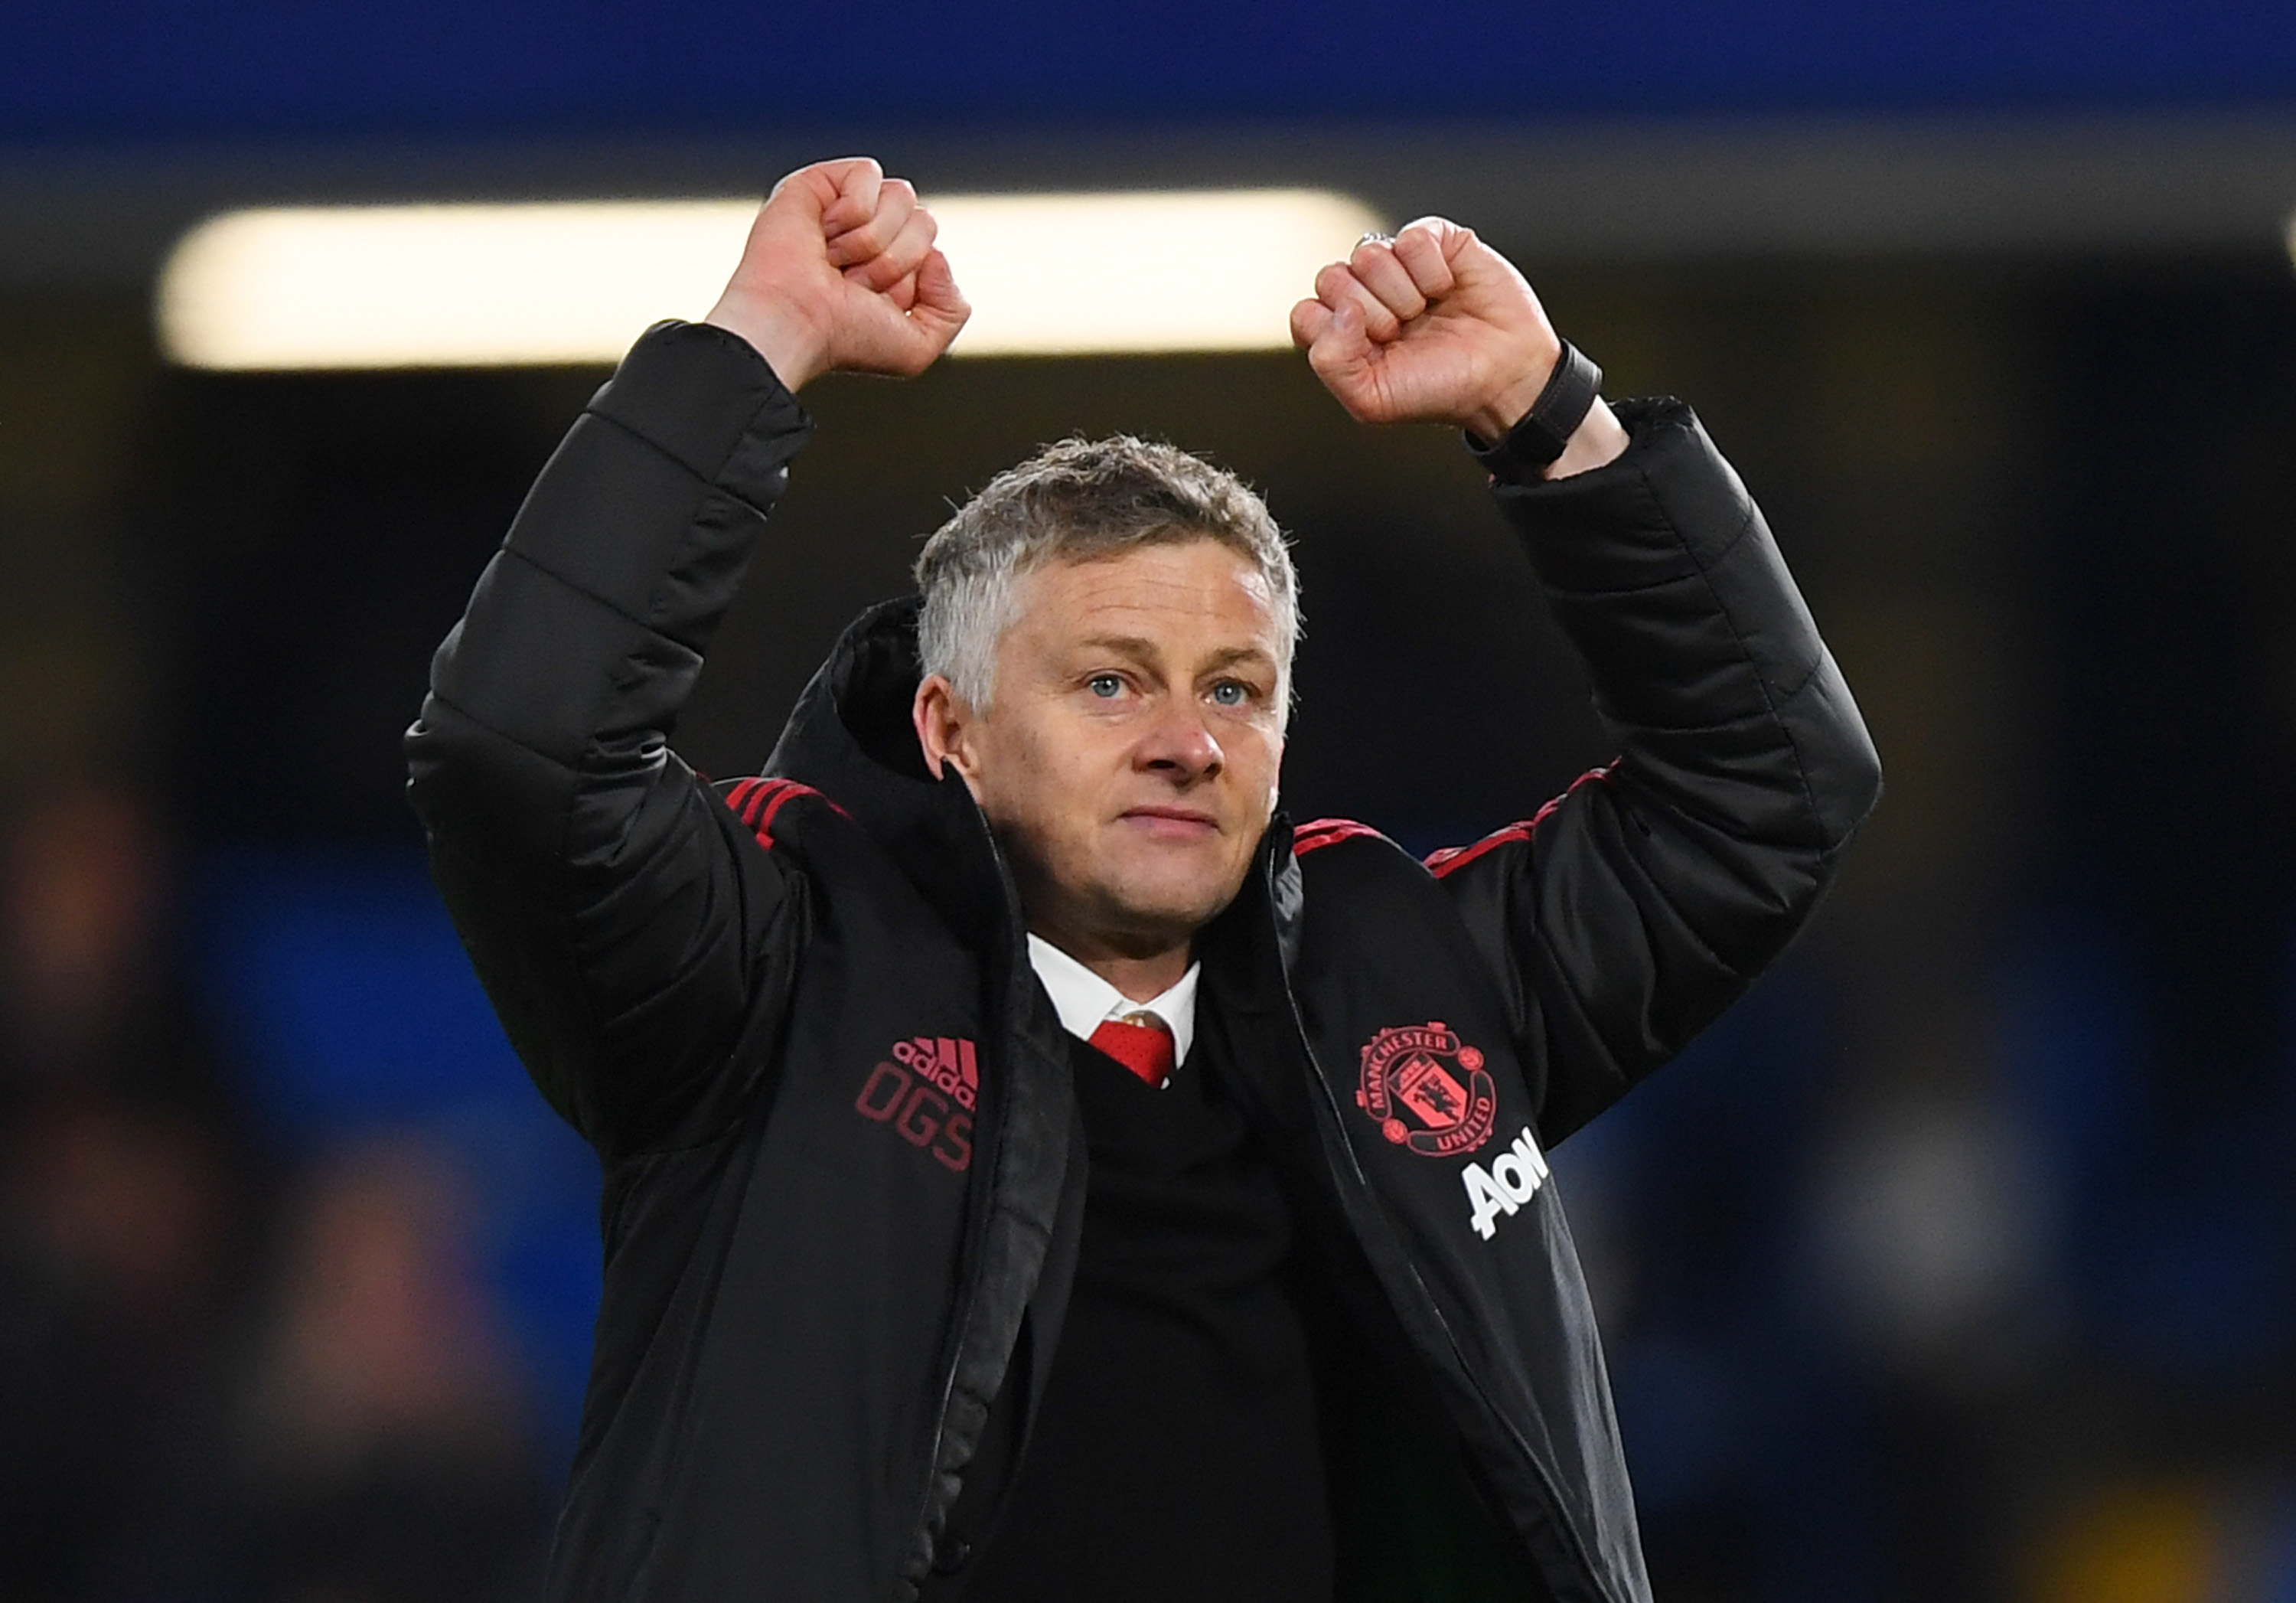 LONDON, ENGLAND - FEBRUARY 18:  Ole Gunnar Solskjaer, Interim Manager of Manchester United celebrates victory after the FA Cup Fifth Round match between Chelsea and Manchester United at Stamford Bridge on February 18, 2019 in London, United Kingdom. (Photo by Mike Hewitt/Getty Images)